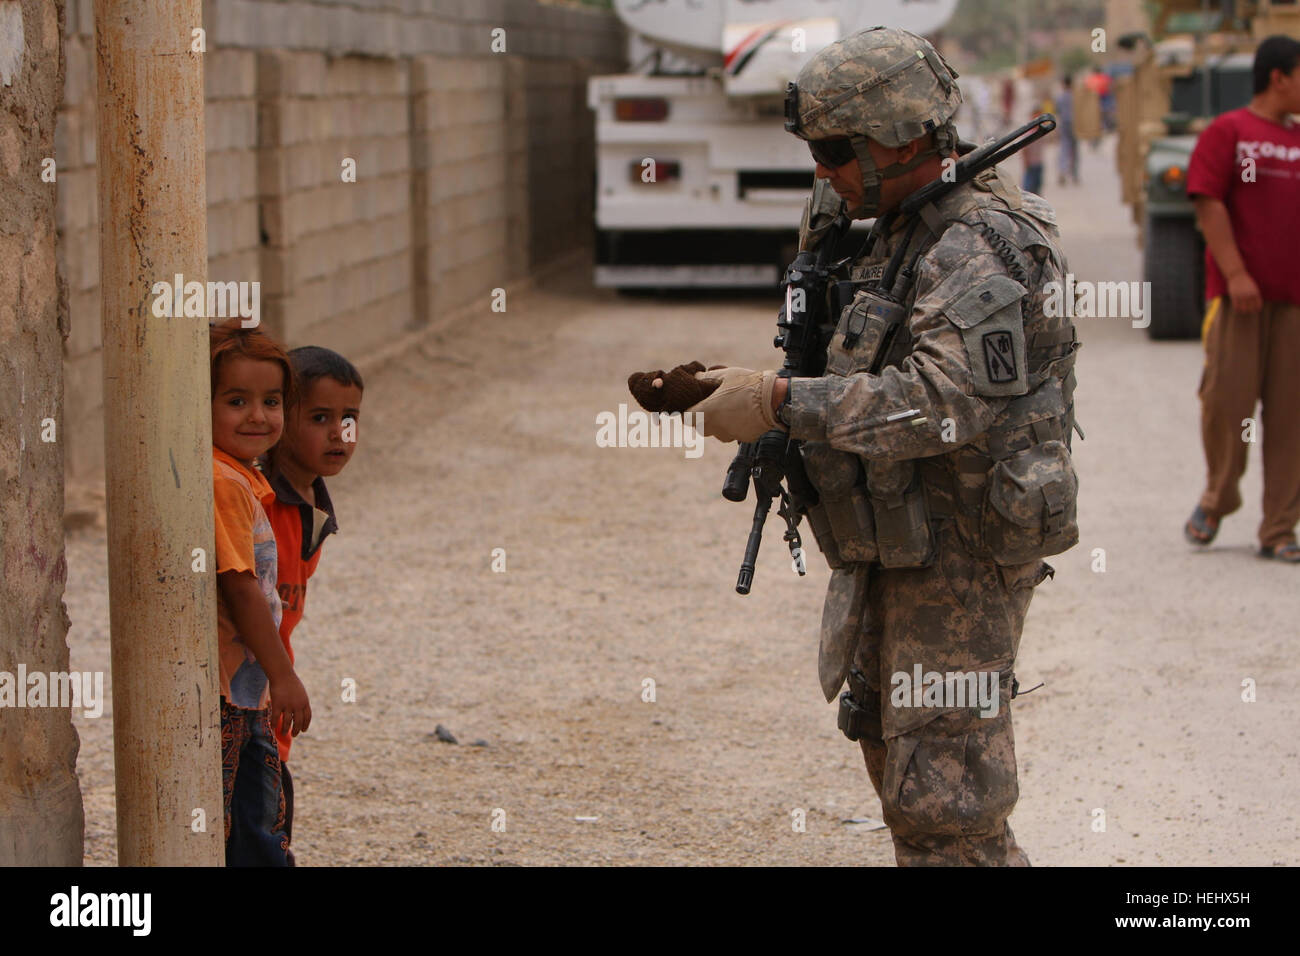 Staff Sgt. David Andrews of Duncan, Okla., a member of 1st Battalion 158th Field Artillery, 45th Fires Brigade, Oklahoma Army National Guard, stops to visit with some young children during a foot patrol through a village outside of Camp Ramadi, Iraq, May 10, 2009. Members of the 1-158th FA were deployed last fall to help provide security for the camp and conduct patrols in order to help maintain the safety of Camp Ramadi and the outlying villages. Camp Ramadi patrols 172880 Stock Photo